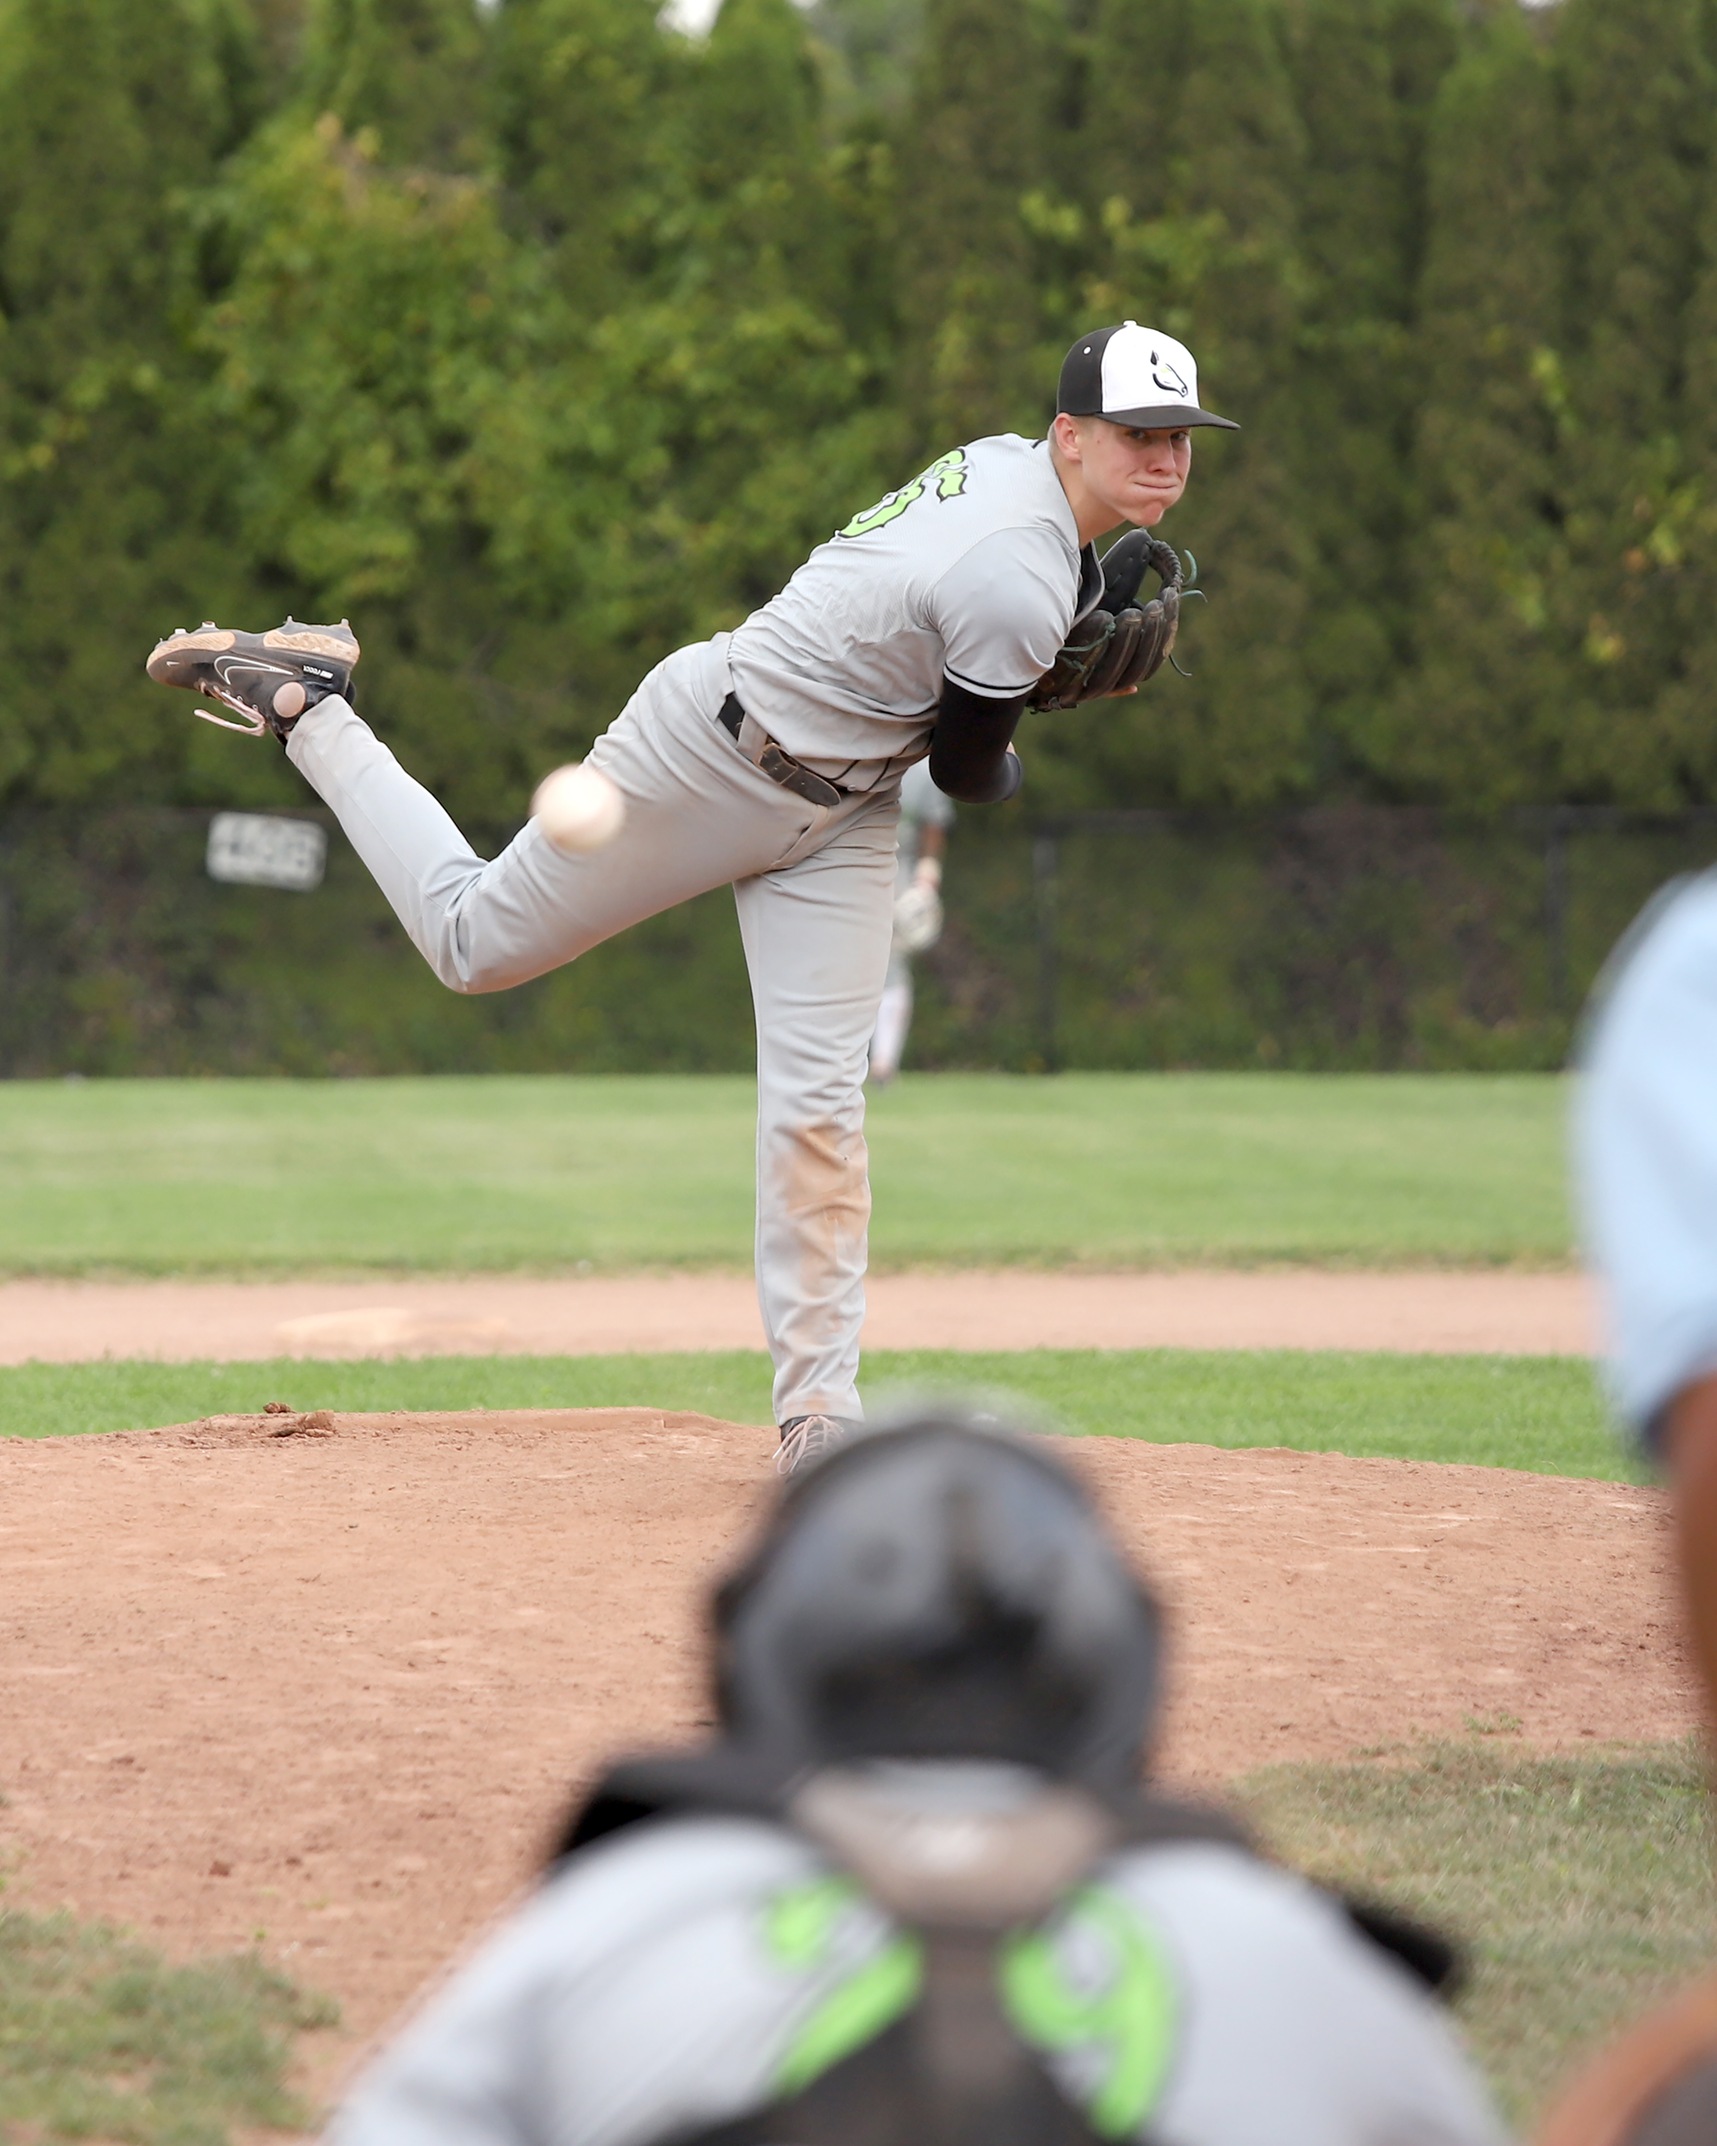 Oates Strikes Again with Unbeatable Pitching Performance